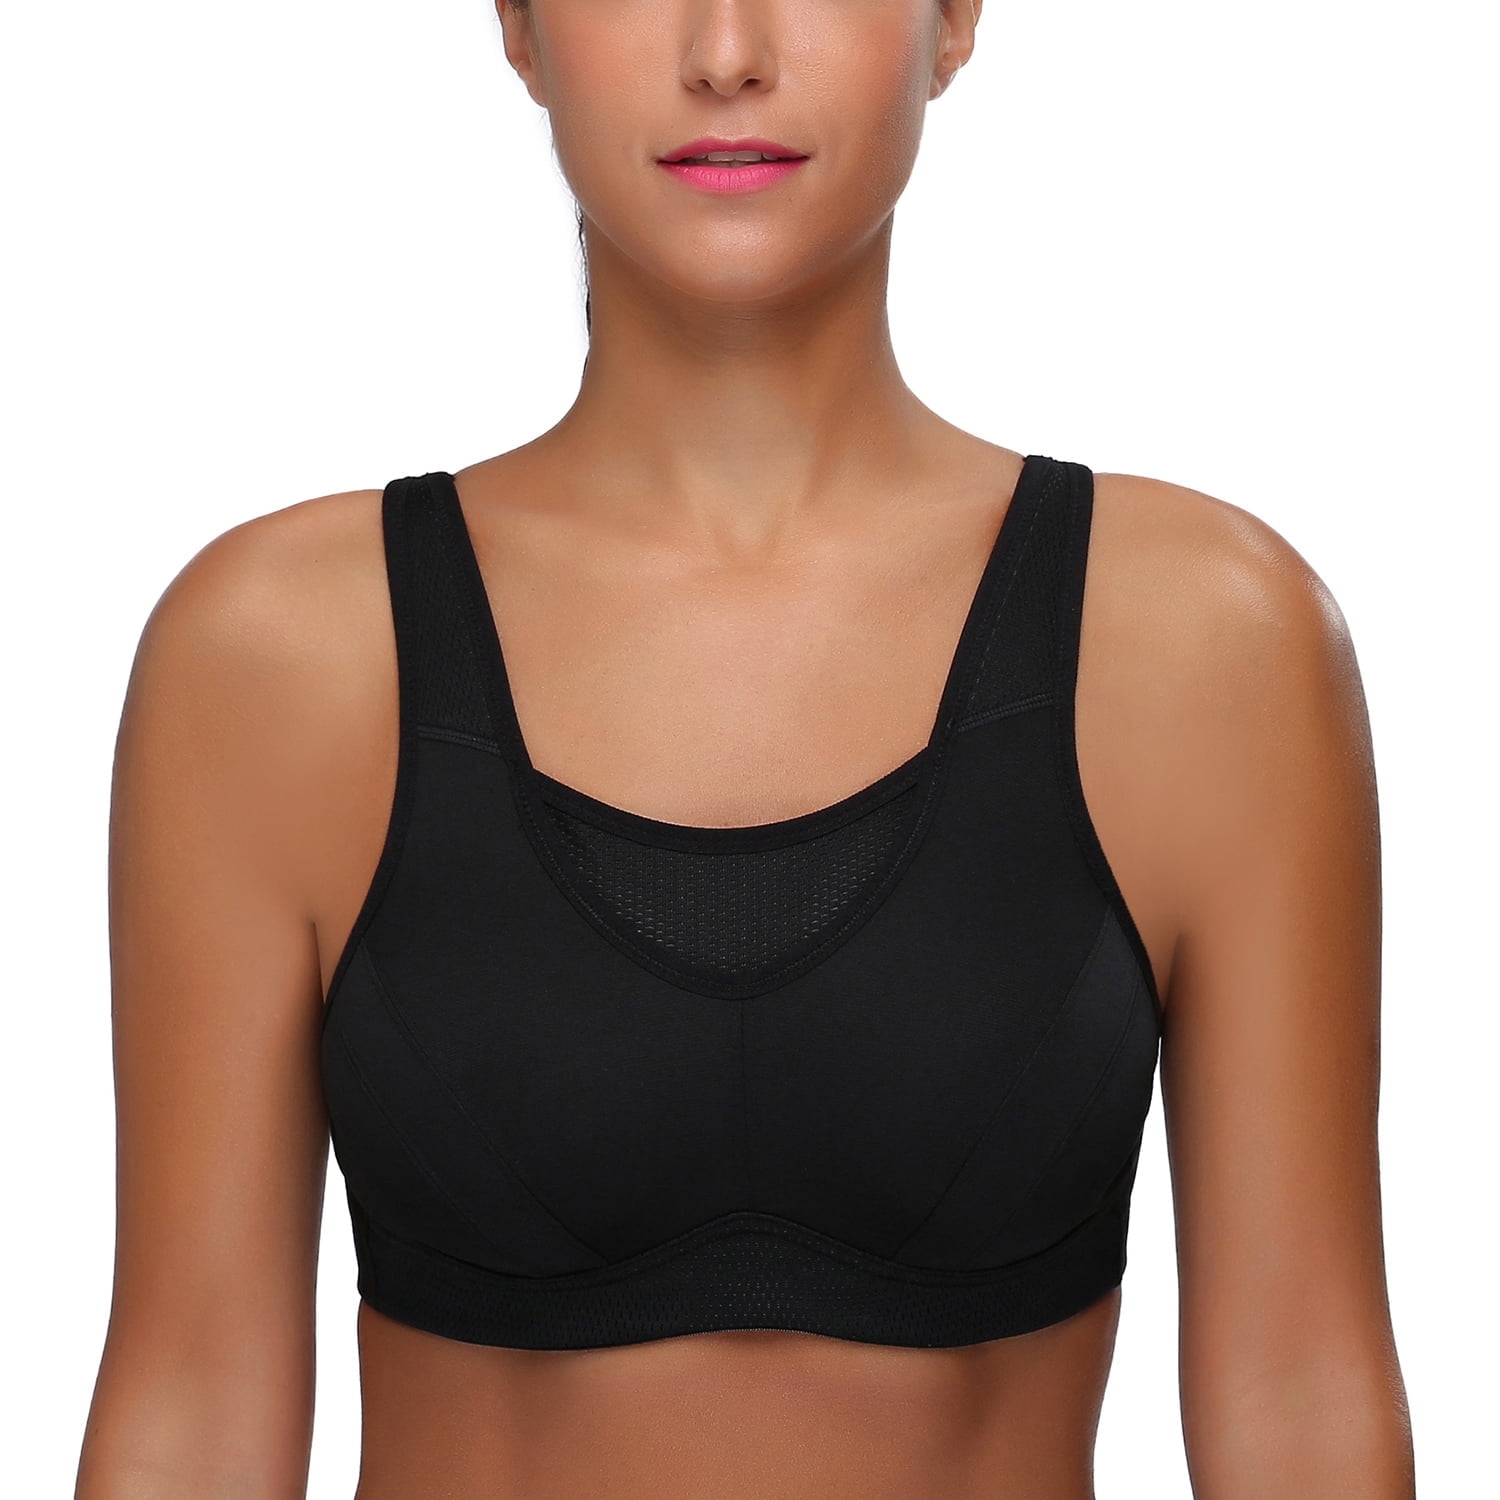 Buy ALAXENDRE High Impact Sports Bras for Women Free Size (28 till